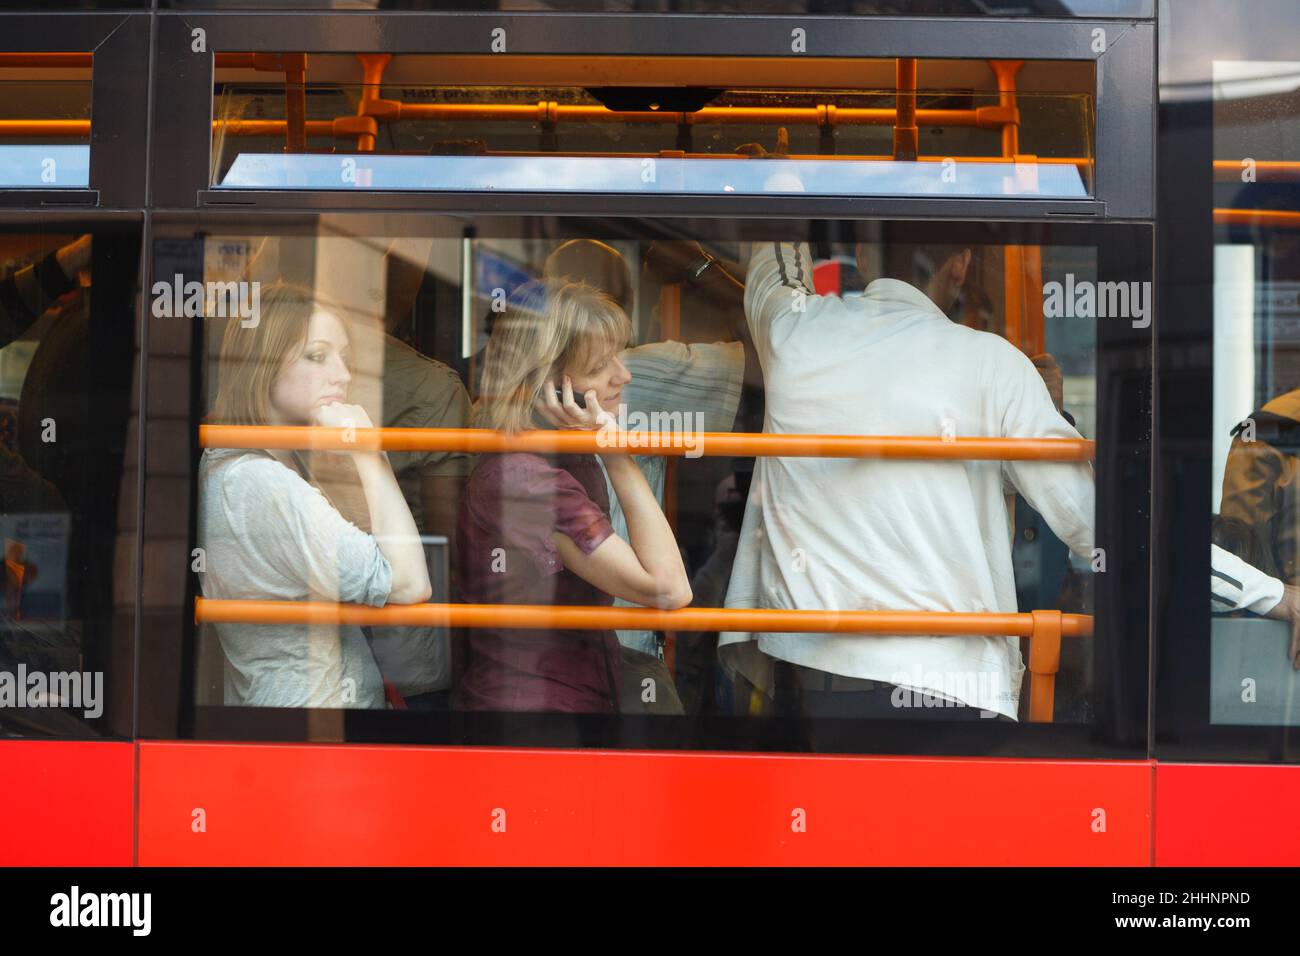 Commuters on an overcrowded bus, caused by the calling of a tube strike by the RMT union. New Oxford Street, Borough of Camden, London, UK.  3 Sep 2007 Stock Photo